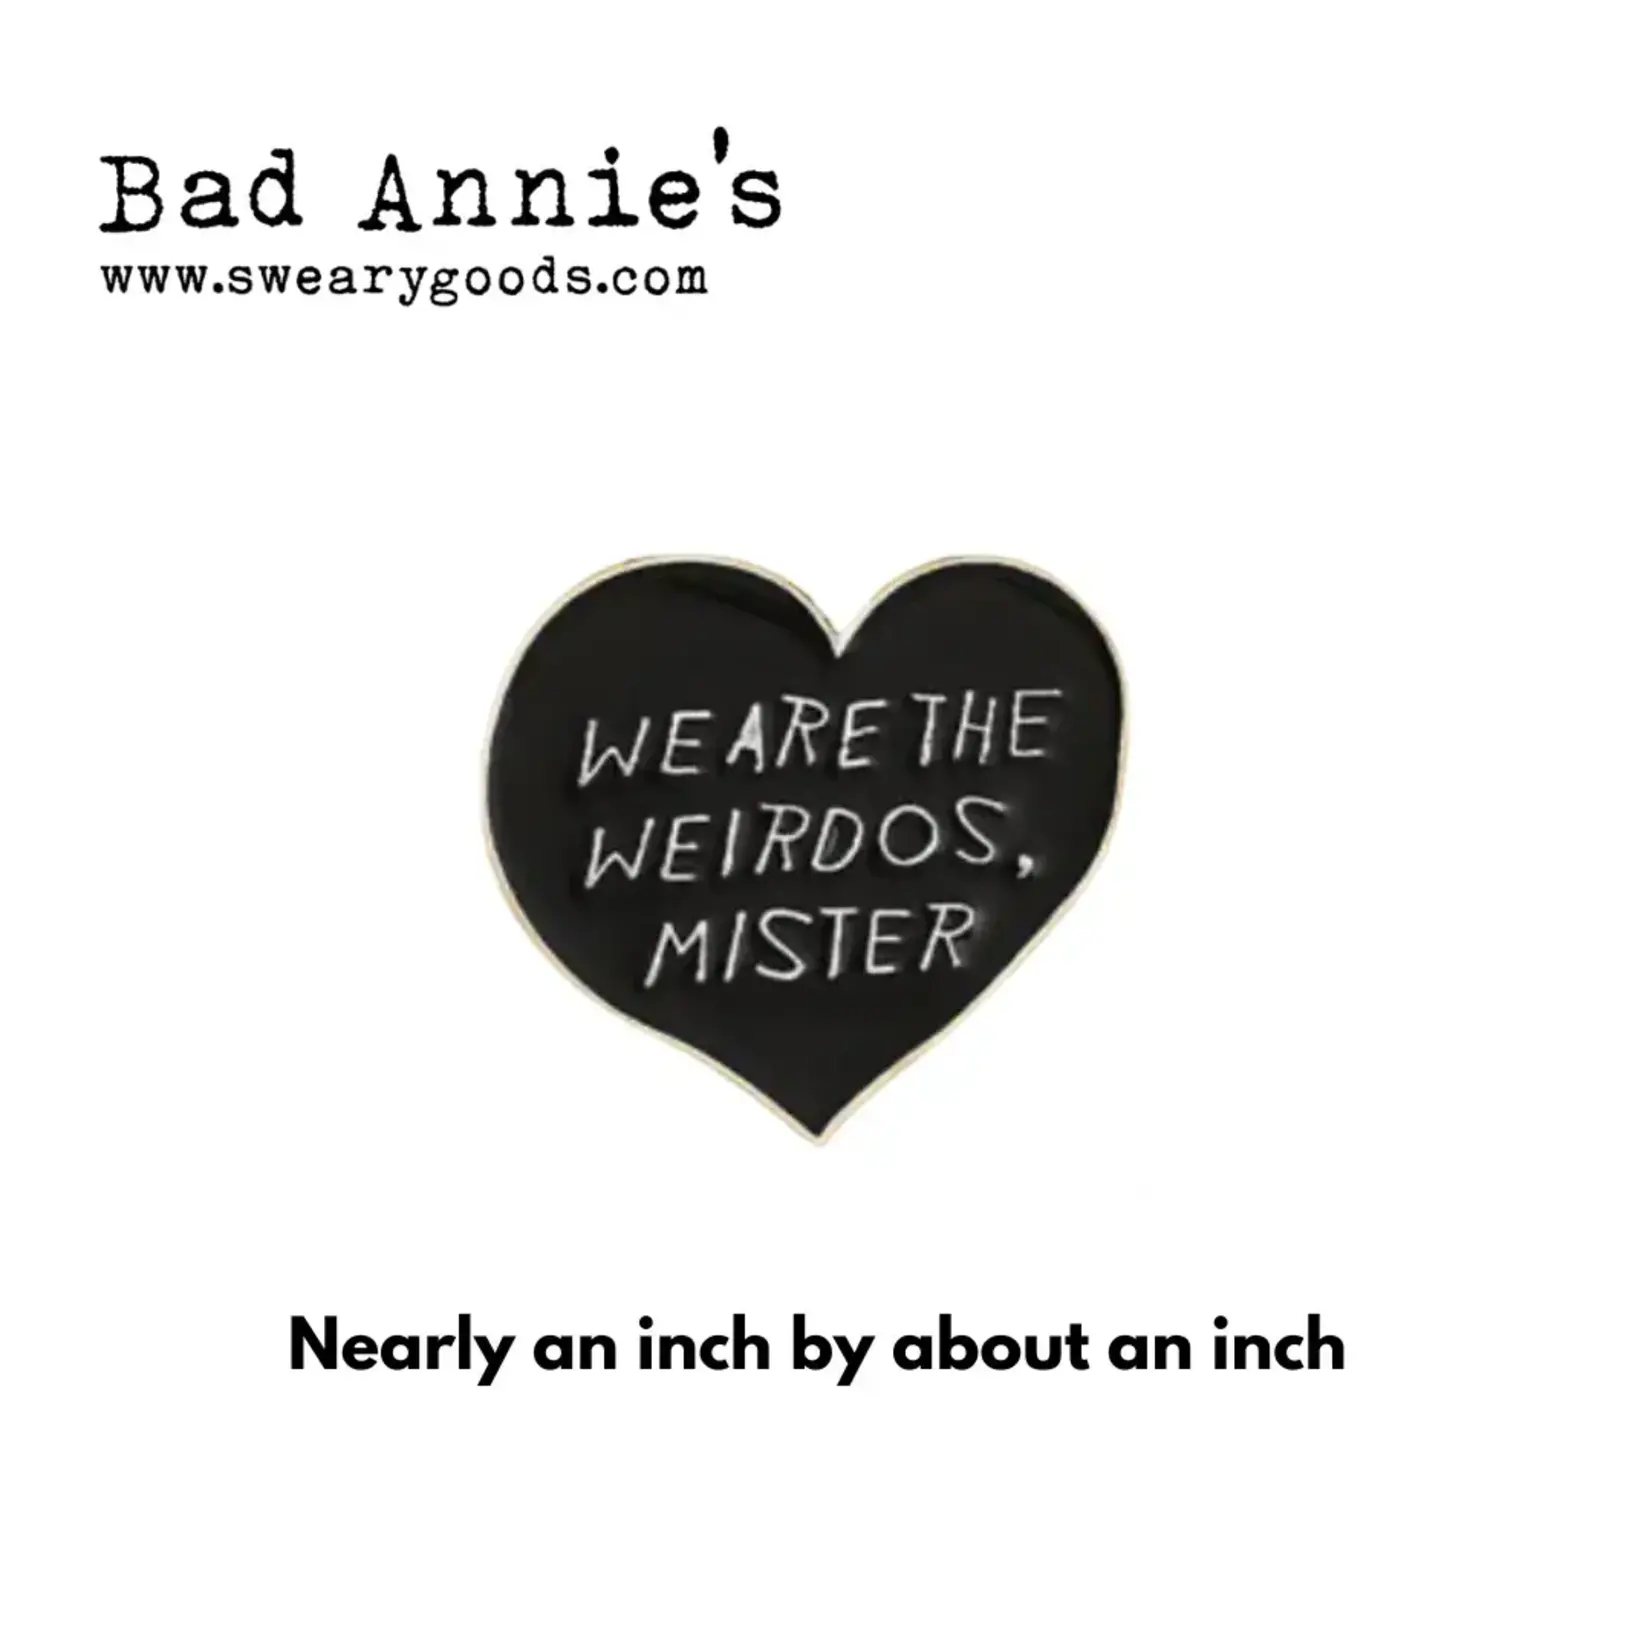 Pin (Enamel) - We are the weirdos mister